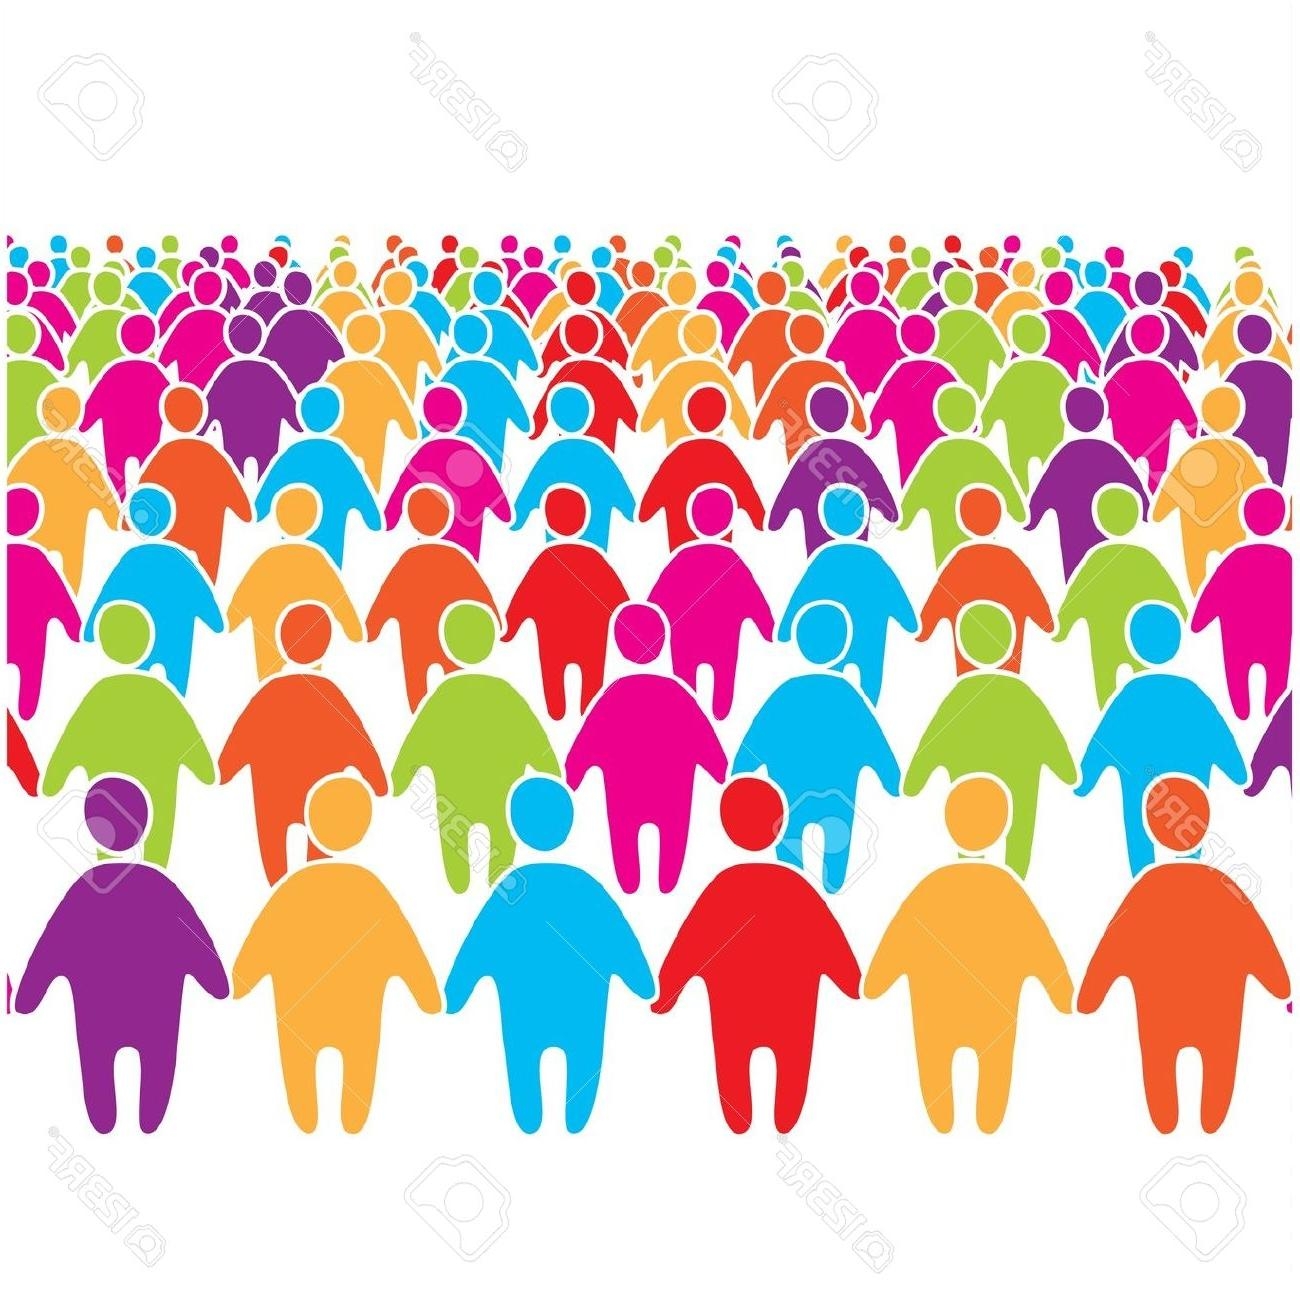 Crowd of people clipart Elegant Crowd clipart large crowd